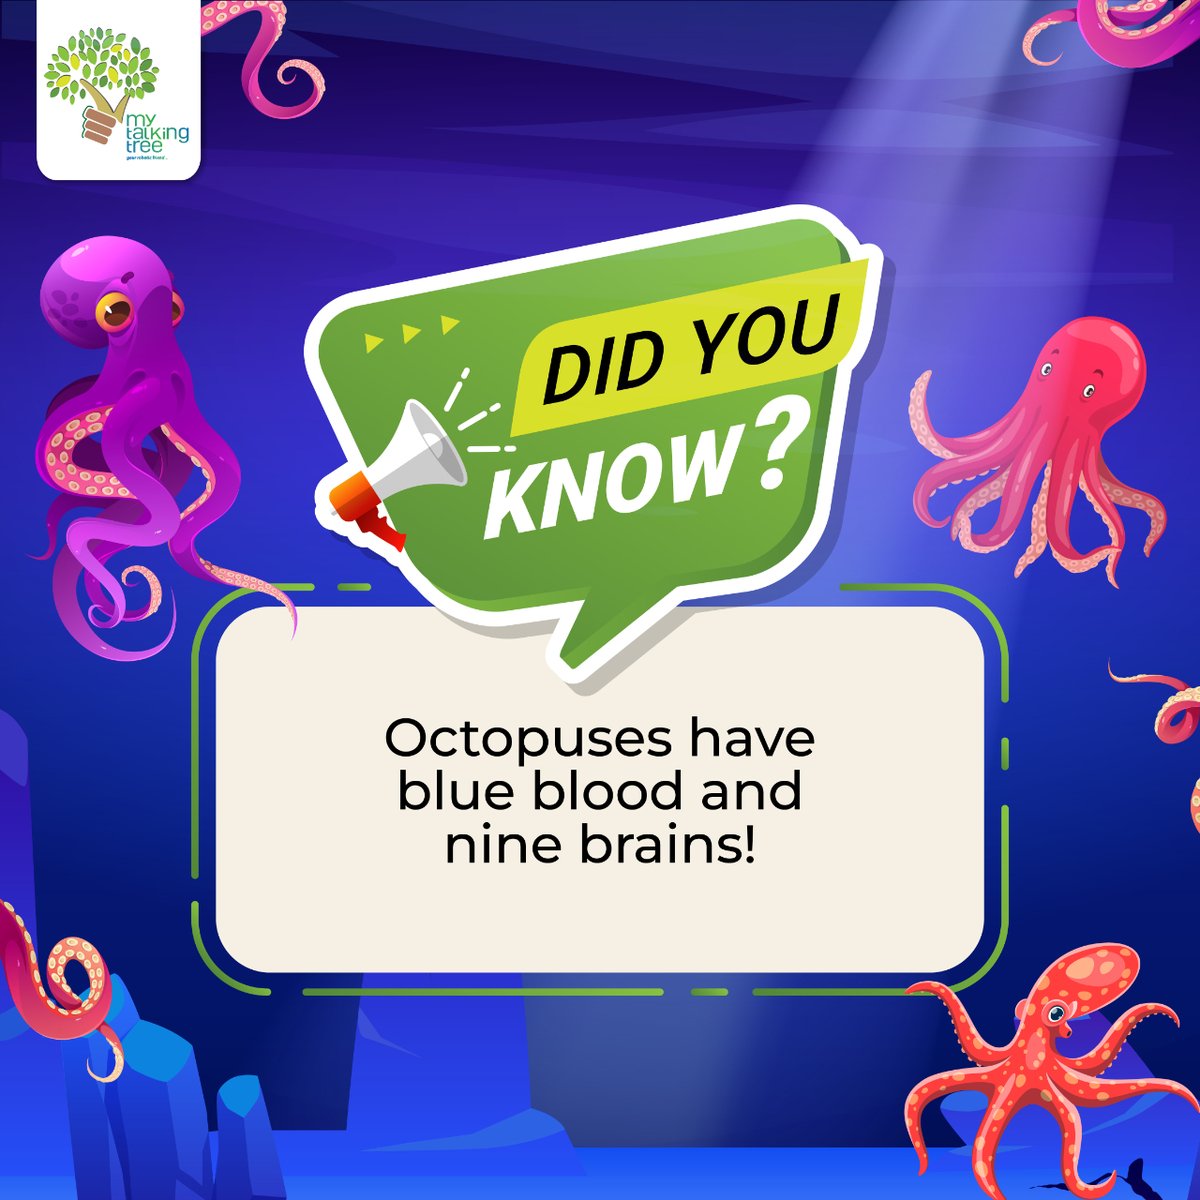 Octopuses are truly out-of-this-world creatures! Not only do they have blue blood, but they also have nine brains! Learn more with My Talking Tree.

#Mytalkingtree #DidYouKnow #FunFact #FactOfTheDay #KnowledgeIsPower #TrueStory #FactsMatter #mrdudu #robotic